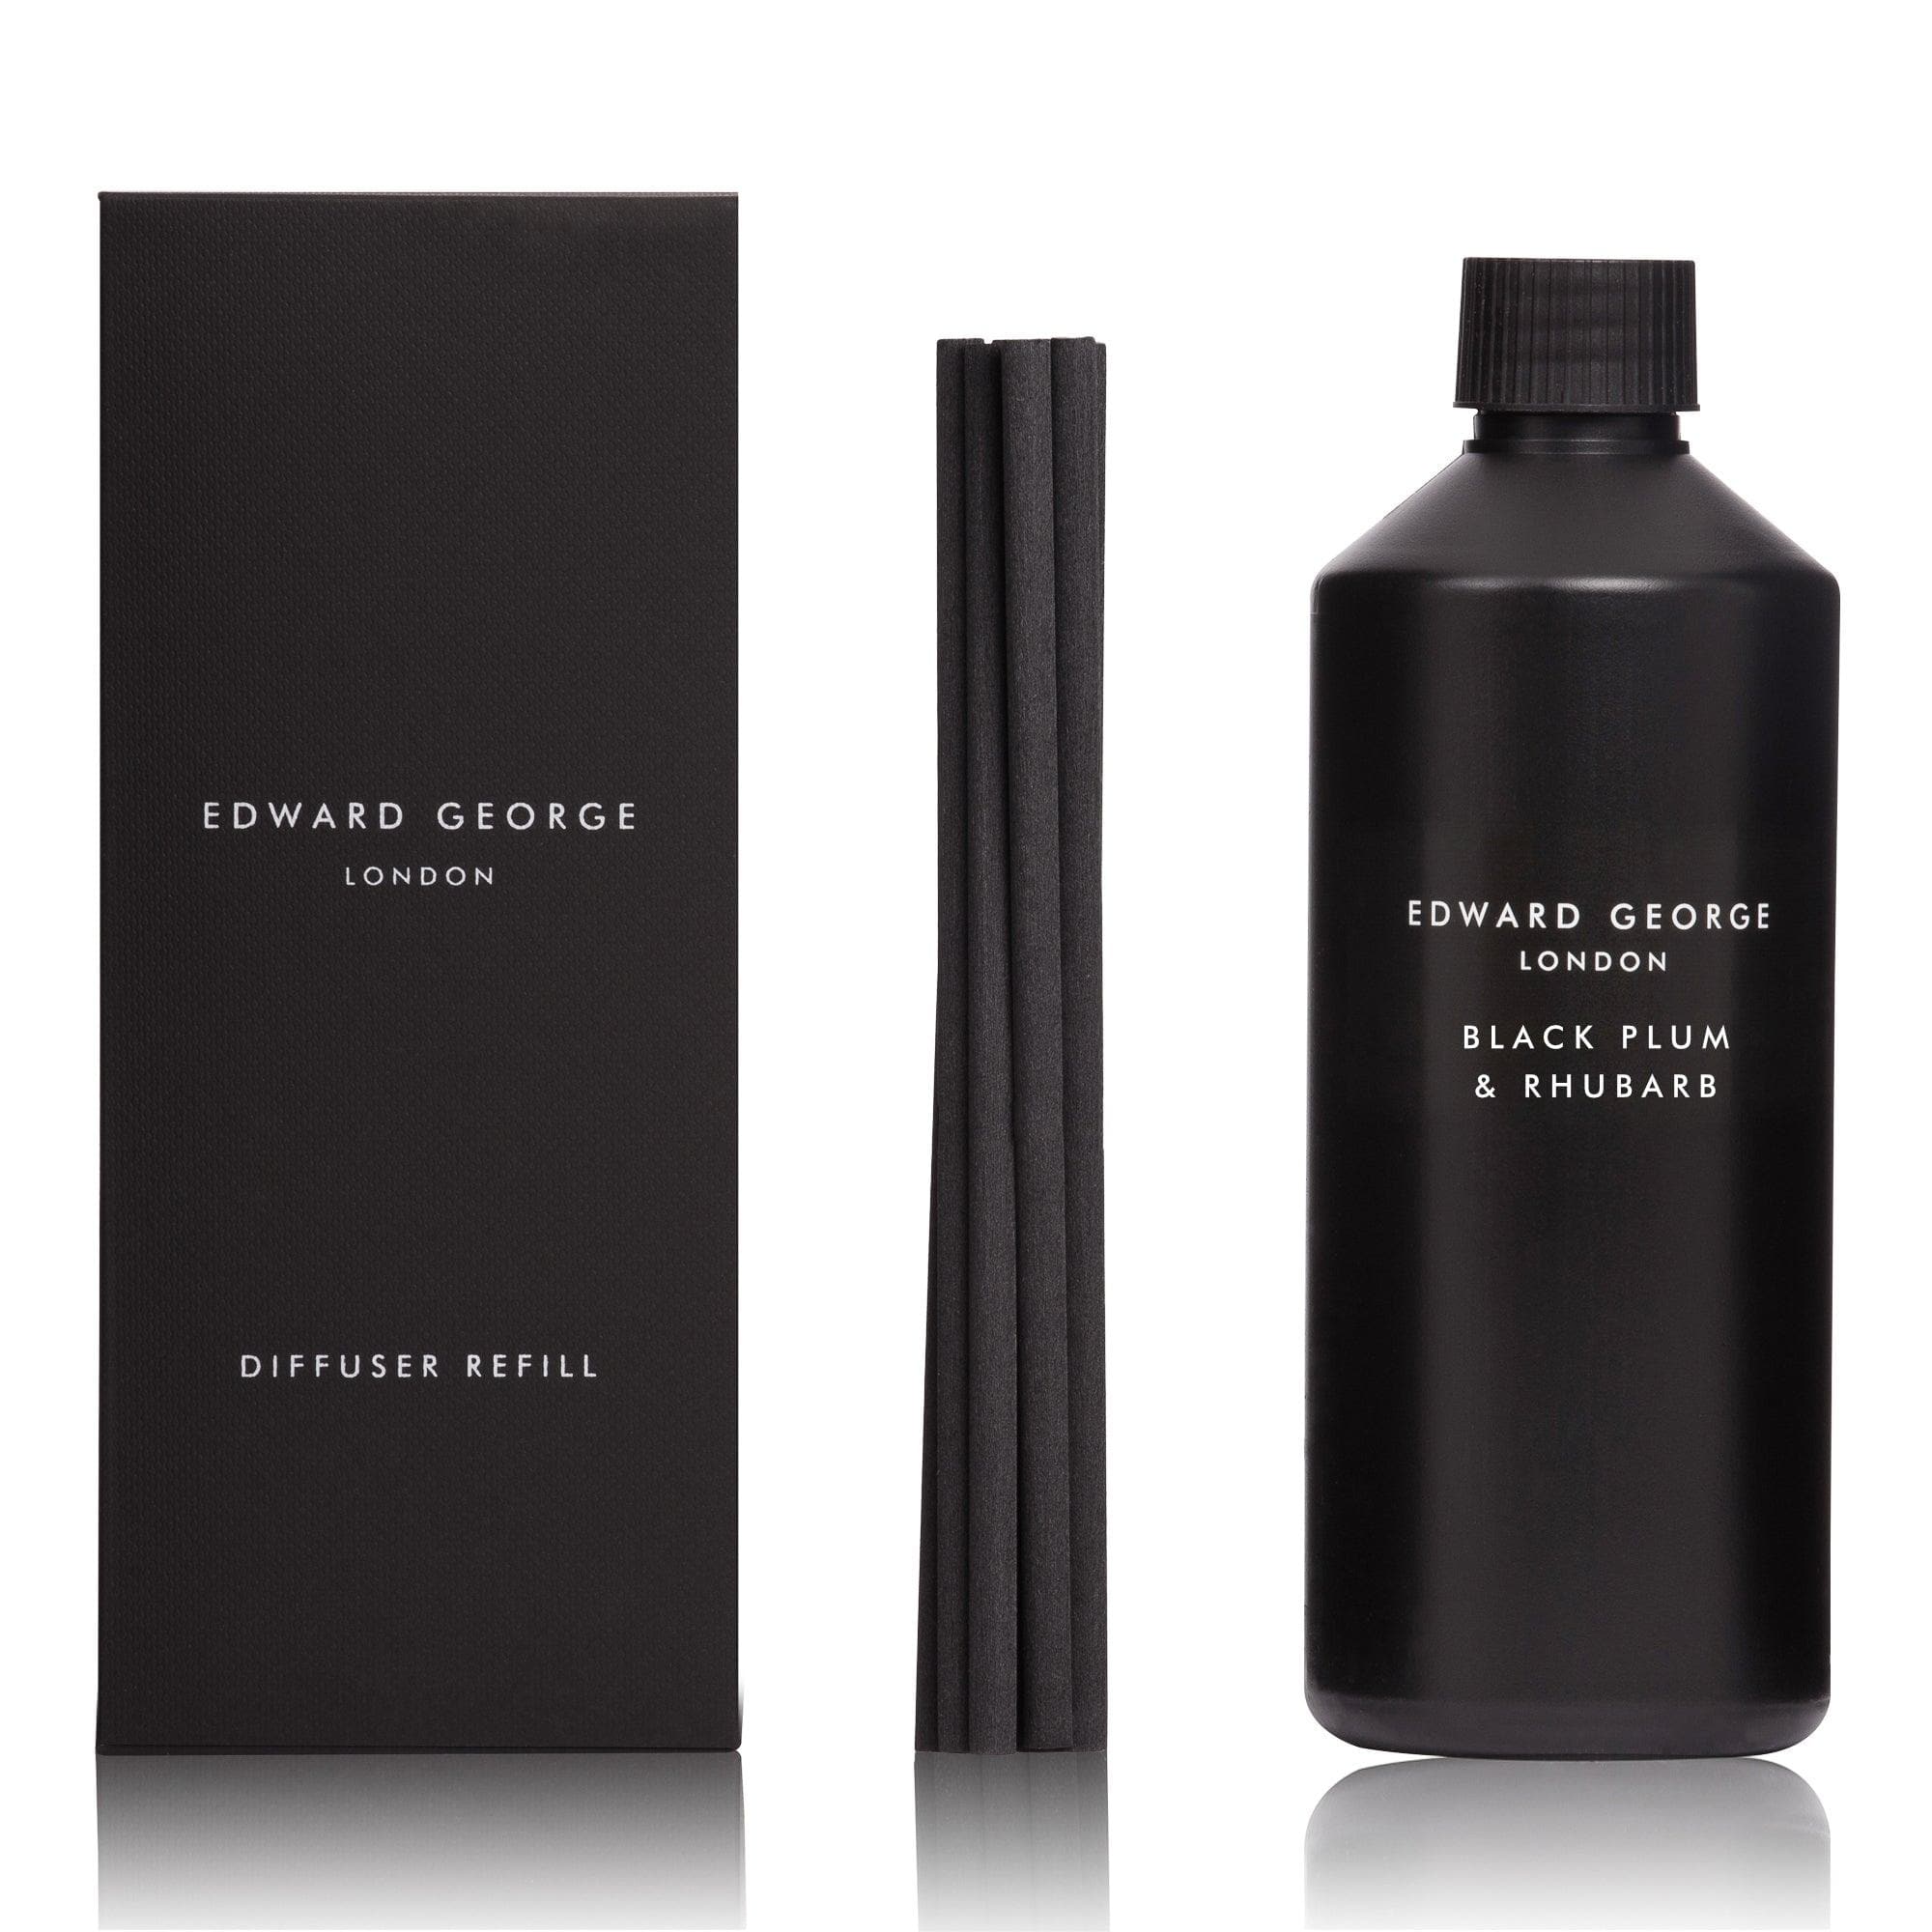 black plum rhubarb reed diffusers refills home fragrance decor room edward george london infographic luxury gift ritual scented england sticks scent oil diffuser refill women men black